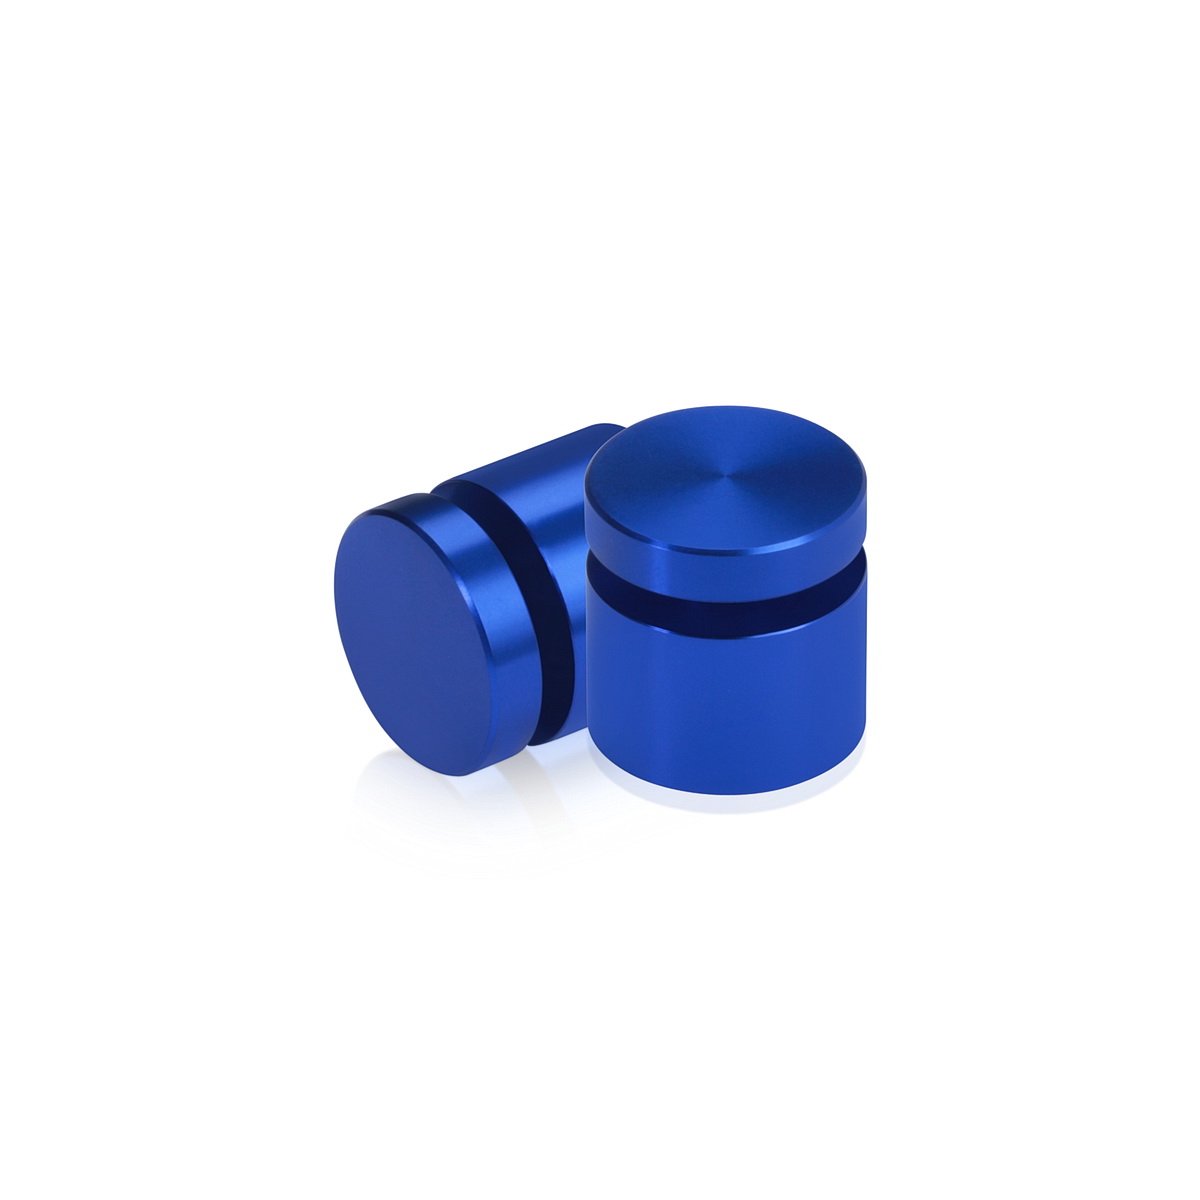 3/4'' Diameter X 1/2'' Barrel Length, Affordable Aluminum Standoffs, Blue Anodized Finish Easy Fasten Standoff (For Inside / Outside use) [Required Material Hole Size: 7/16'']